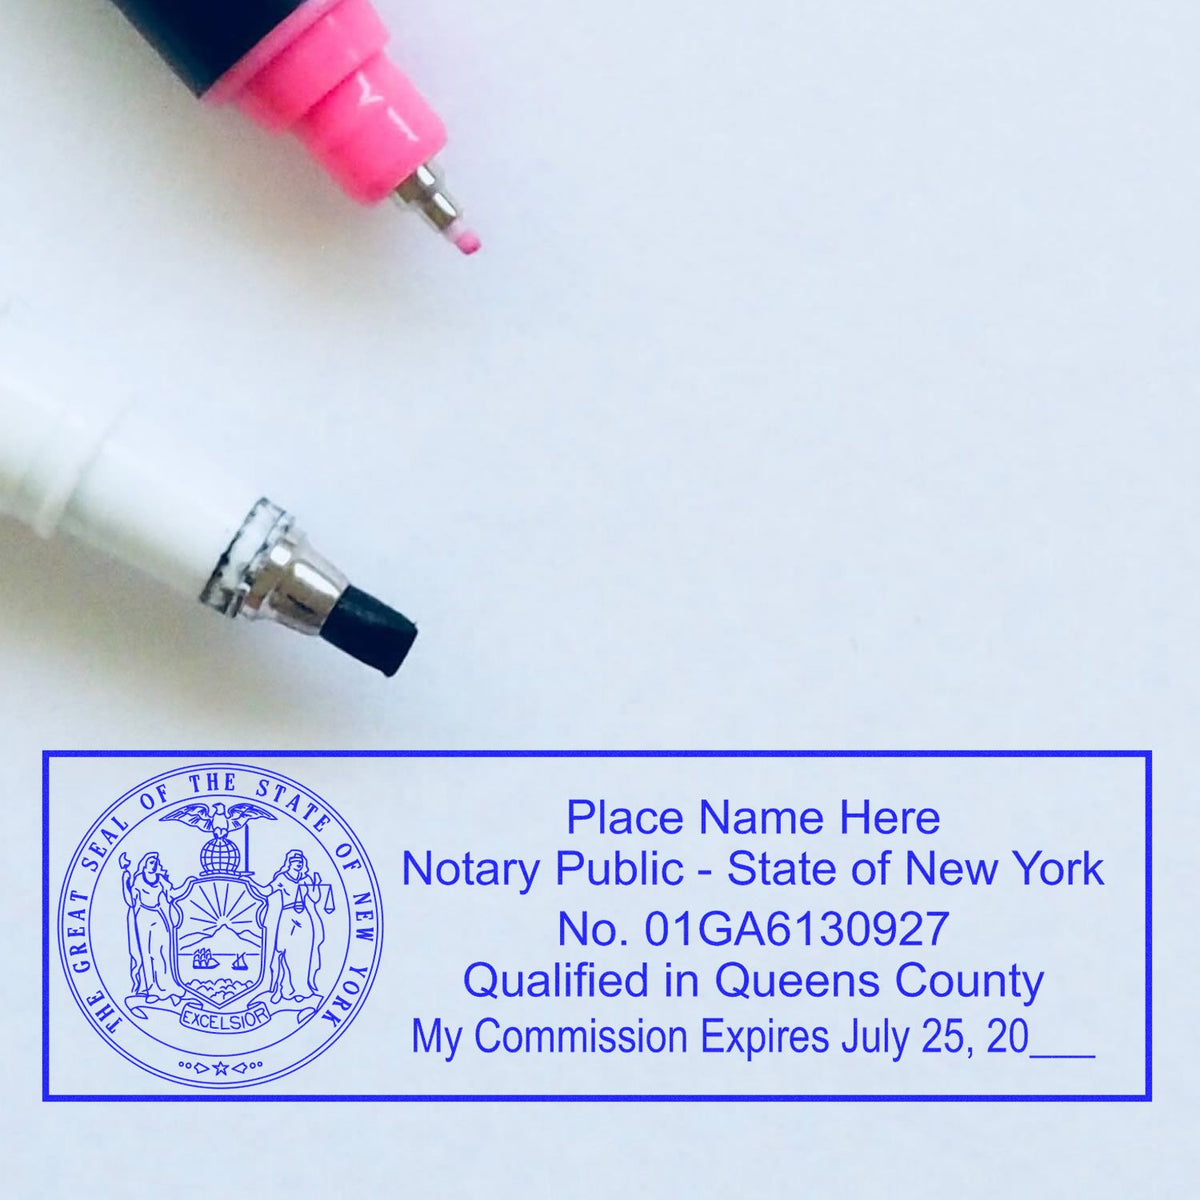 The PSI New York Notary Stamp stamp impression comes to life with a crisp, detailed photo on paper - showcasing true professional quality.